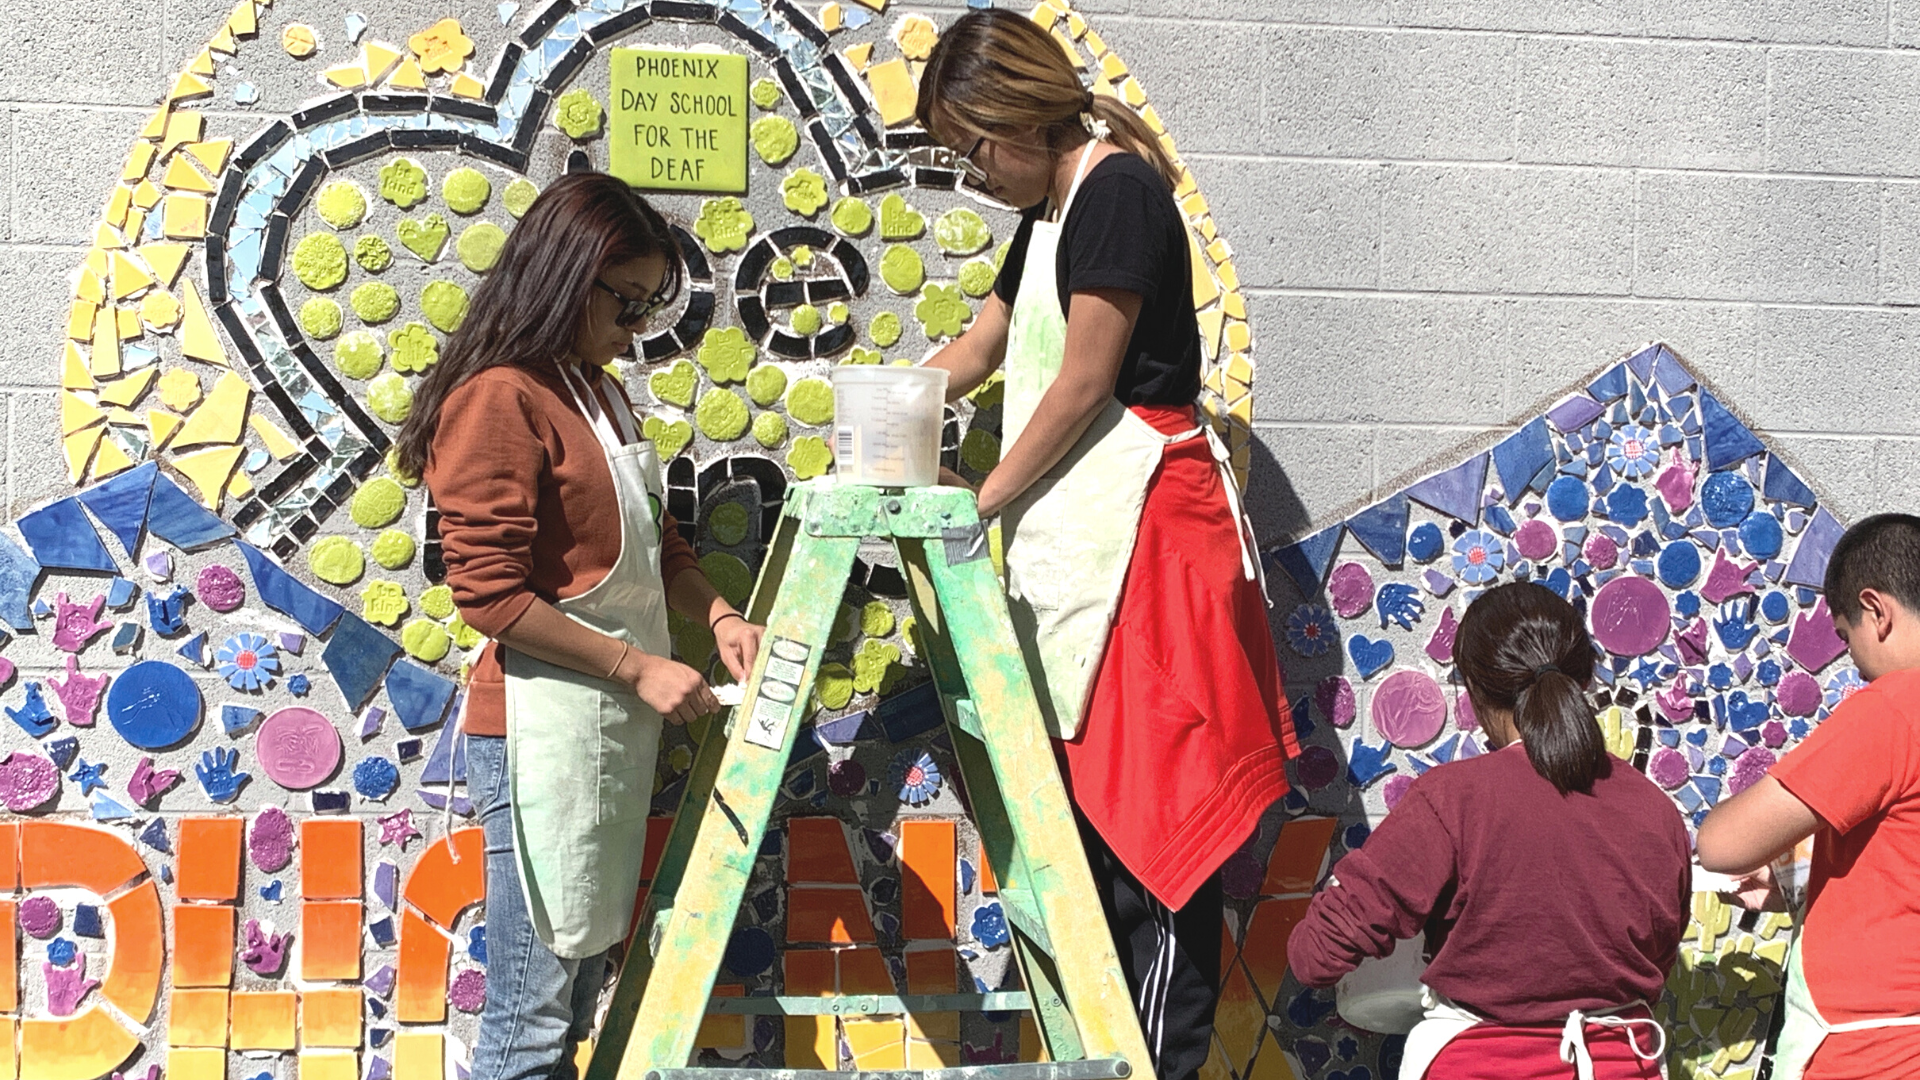 Two students are seen standing on a ladder painting a wall